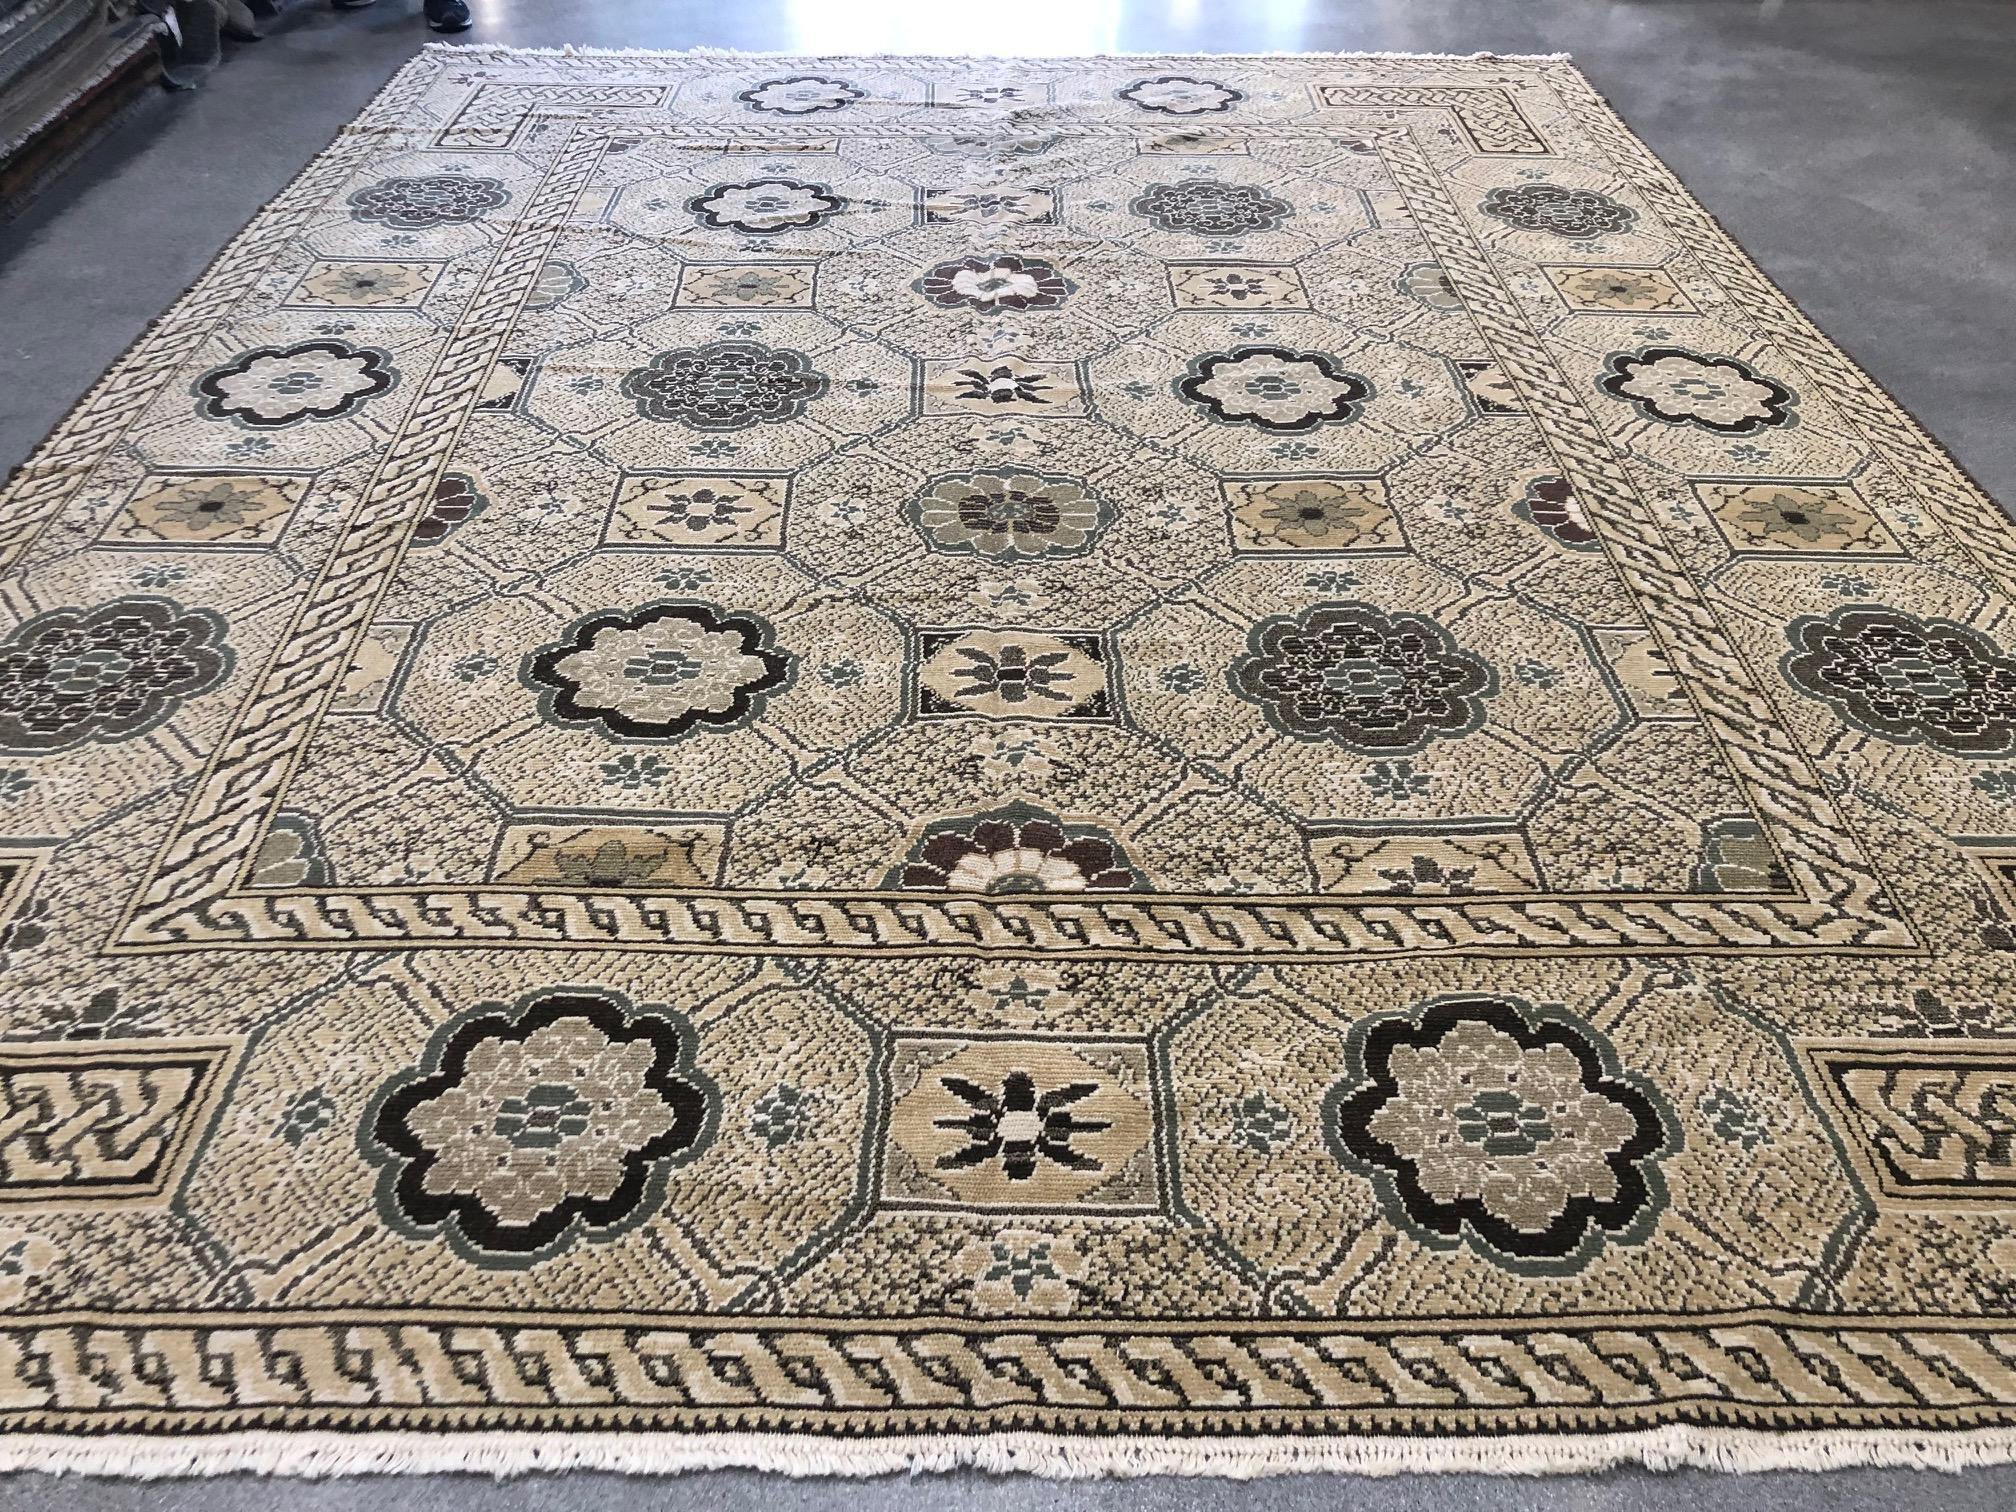 This eclectic rug features a rug-within-a-rug look using braided frames, floral medallions and geometric shapes against a beige background. Brown, taupe, grey and yellow tones add to the distinctive look and feel of a rug that is sure to garner its